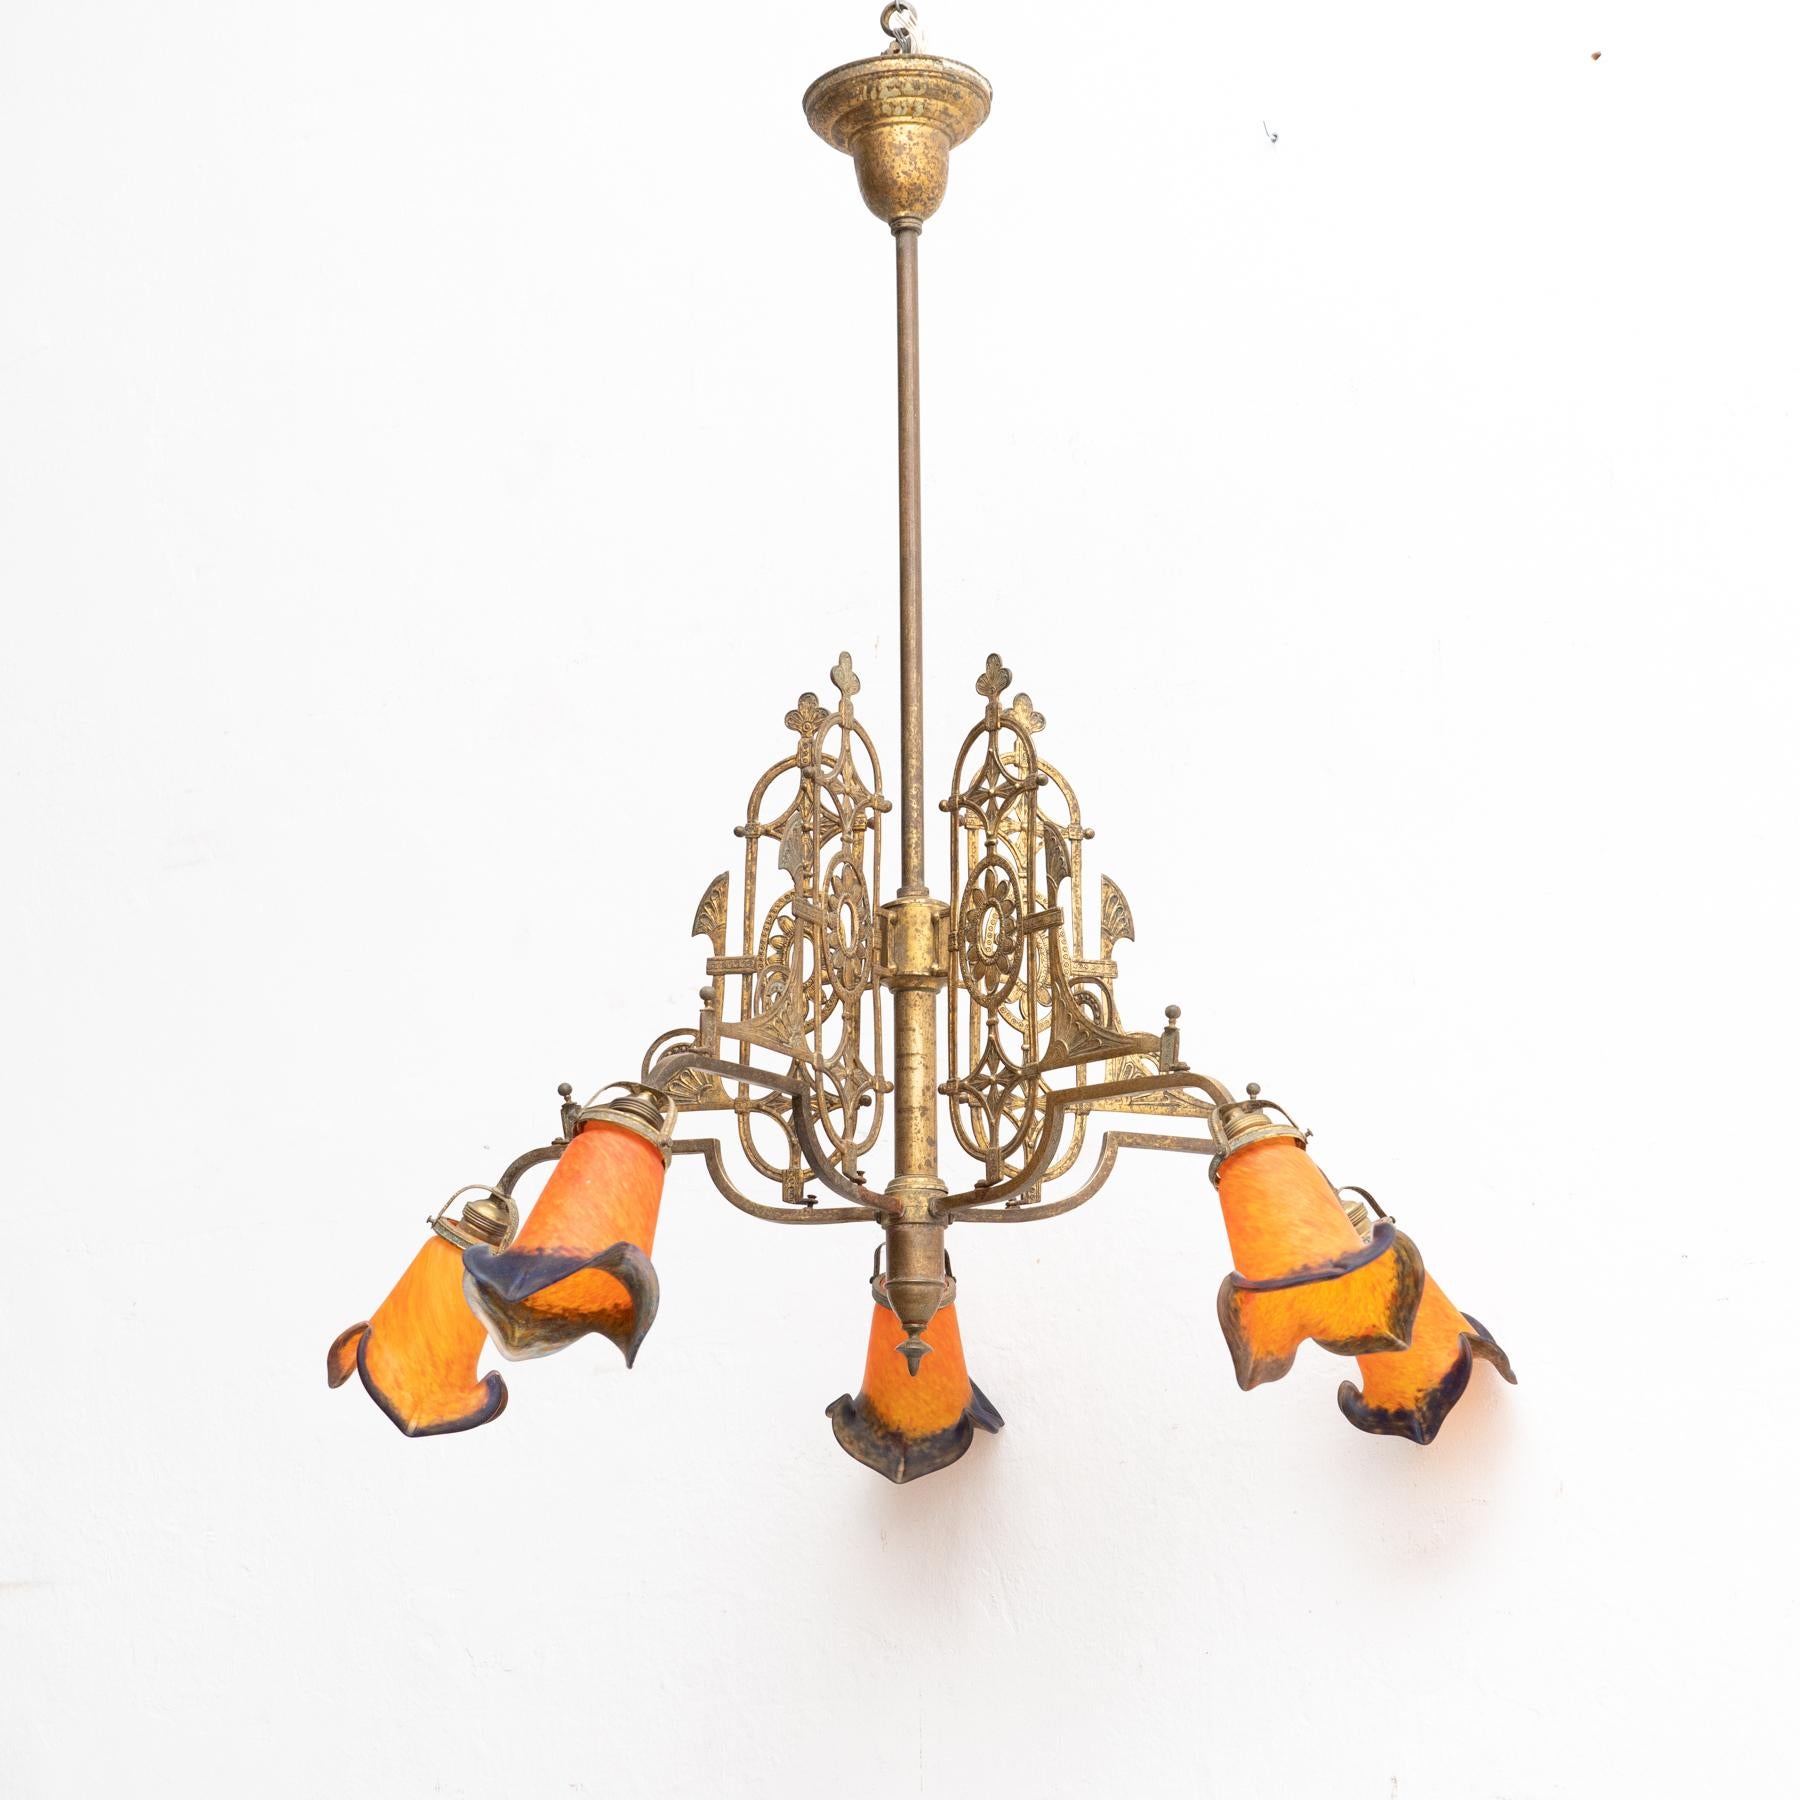 Art Deco Vintage French Brass and Glass Ceiling Lamp circa 1930